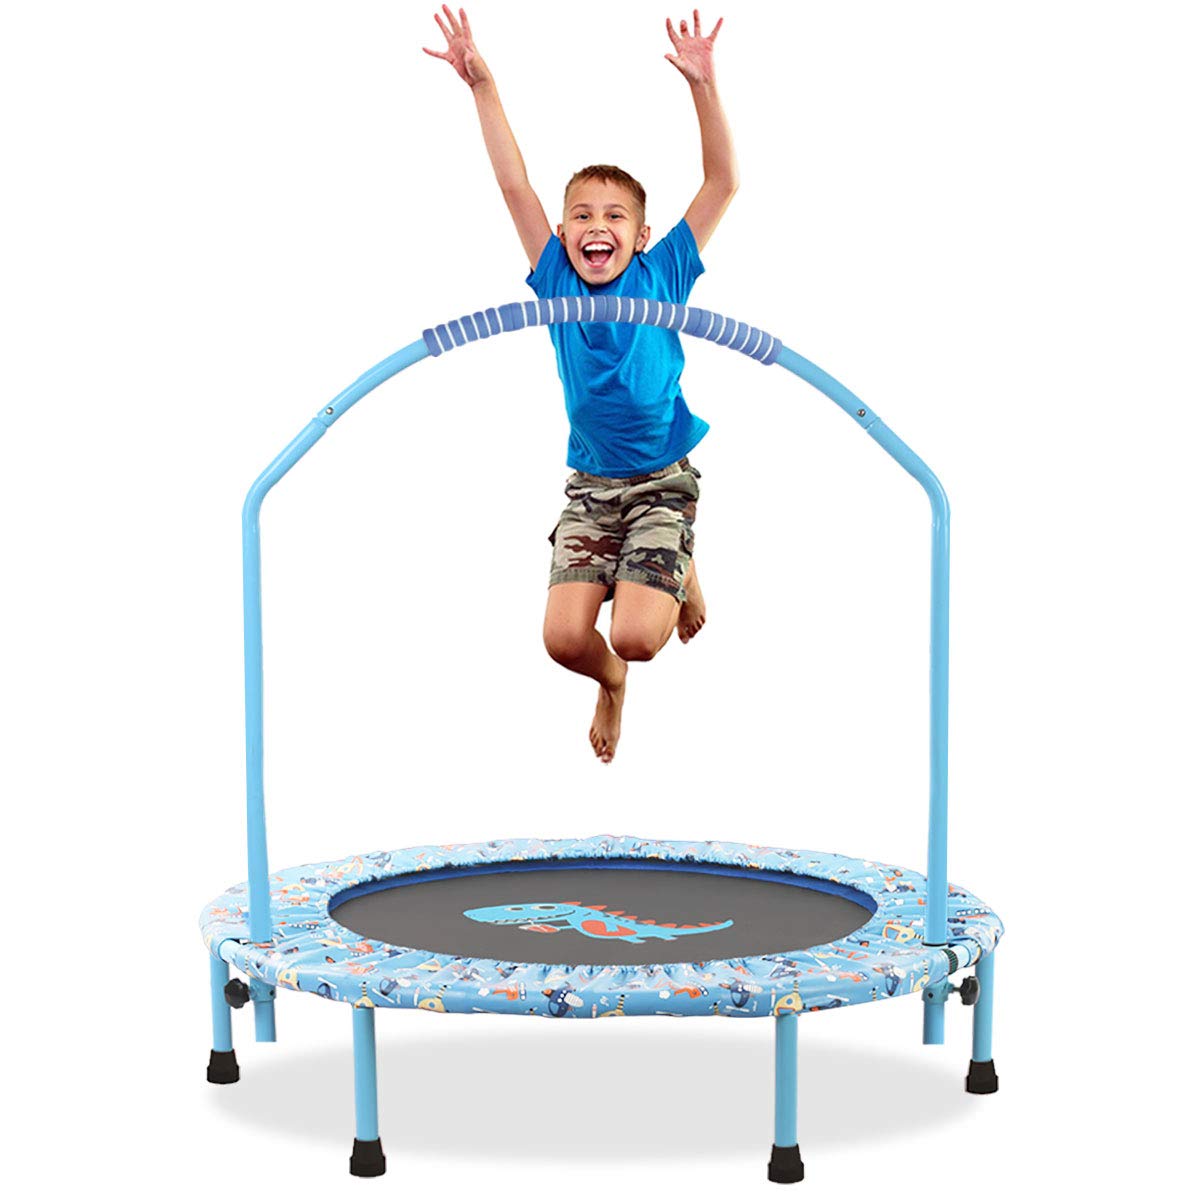 LBLA Mini Trampoline for Kids 38 inches Foldable Trampoline with Adjustable Handrail and Safety Padded Bungee Rebounder Toddlers Trampoline Indoor/Outdoor (Blue) Featured Image